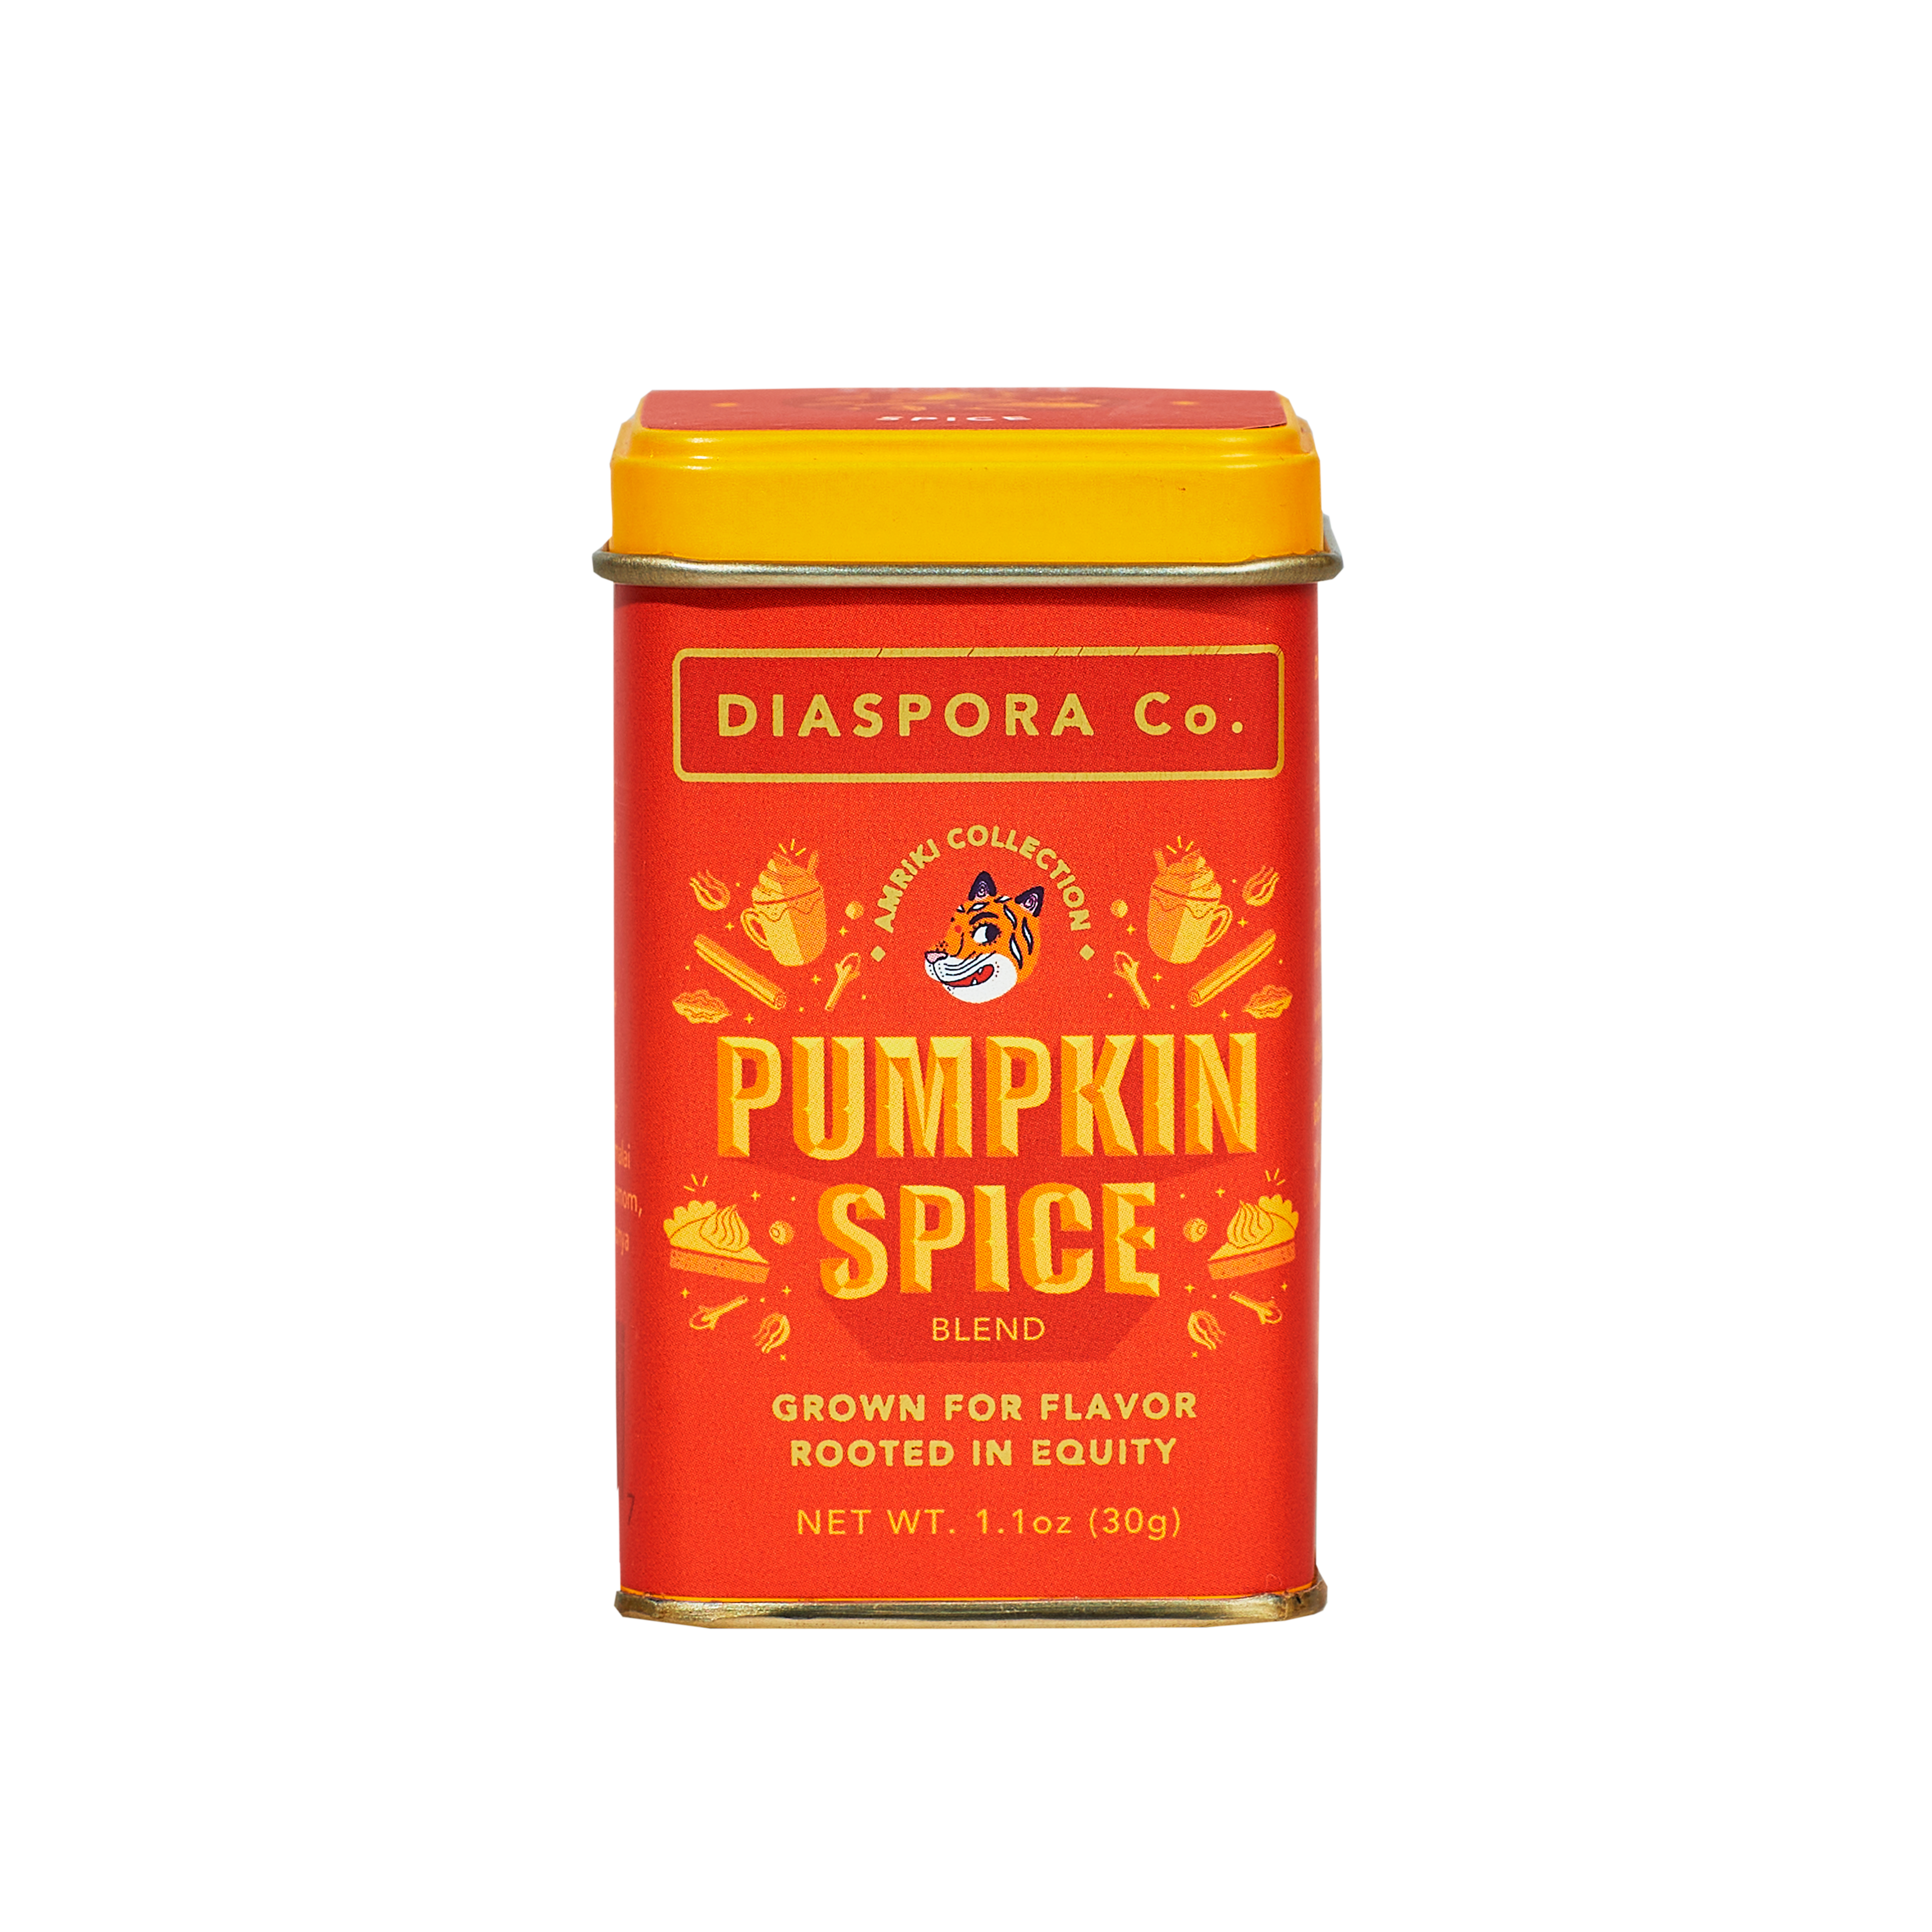 Pumpkin Spice Products That Are Taking Things Next Level